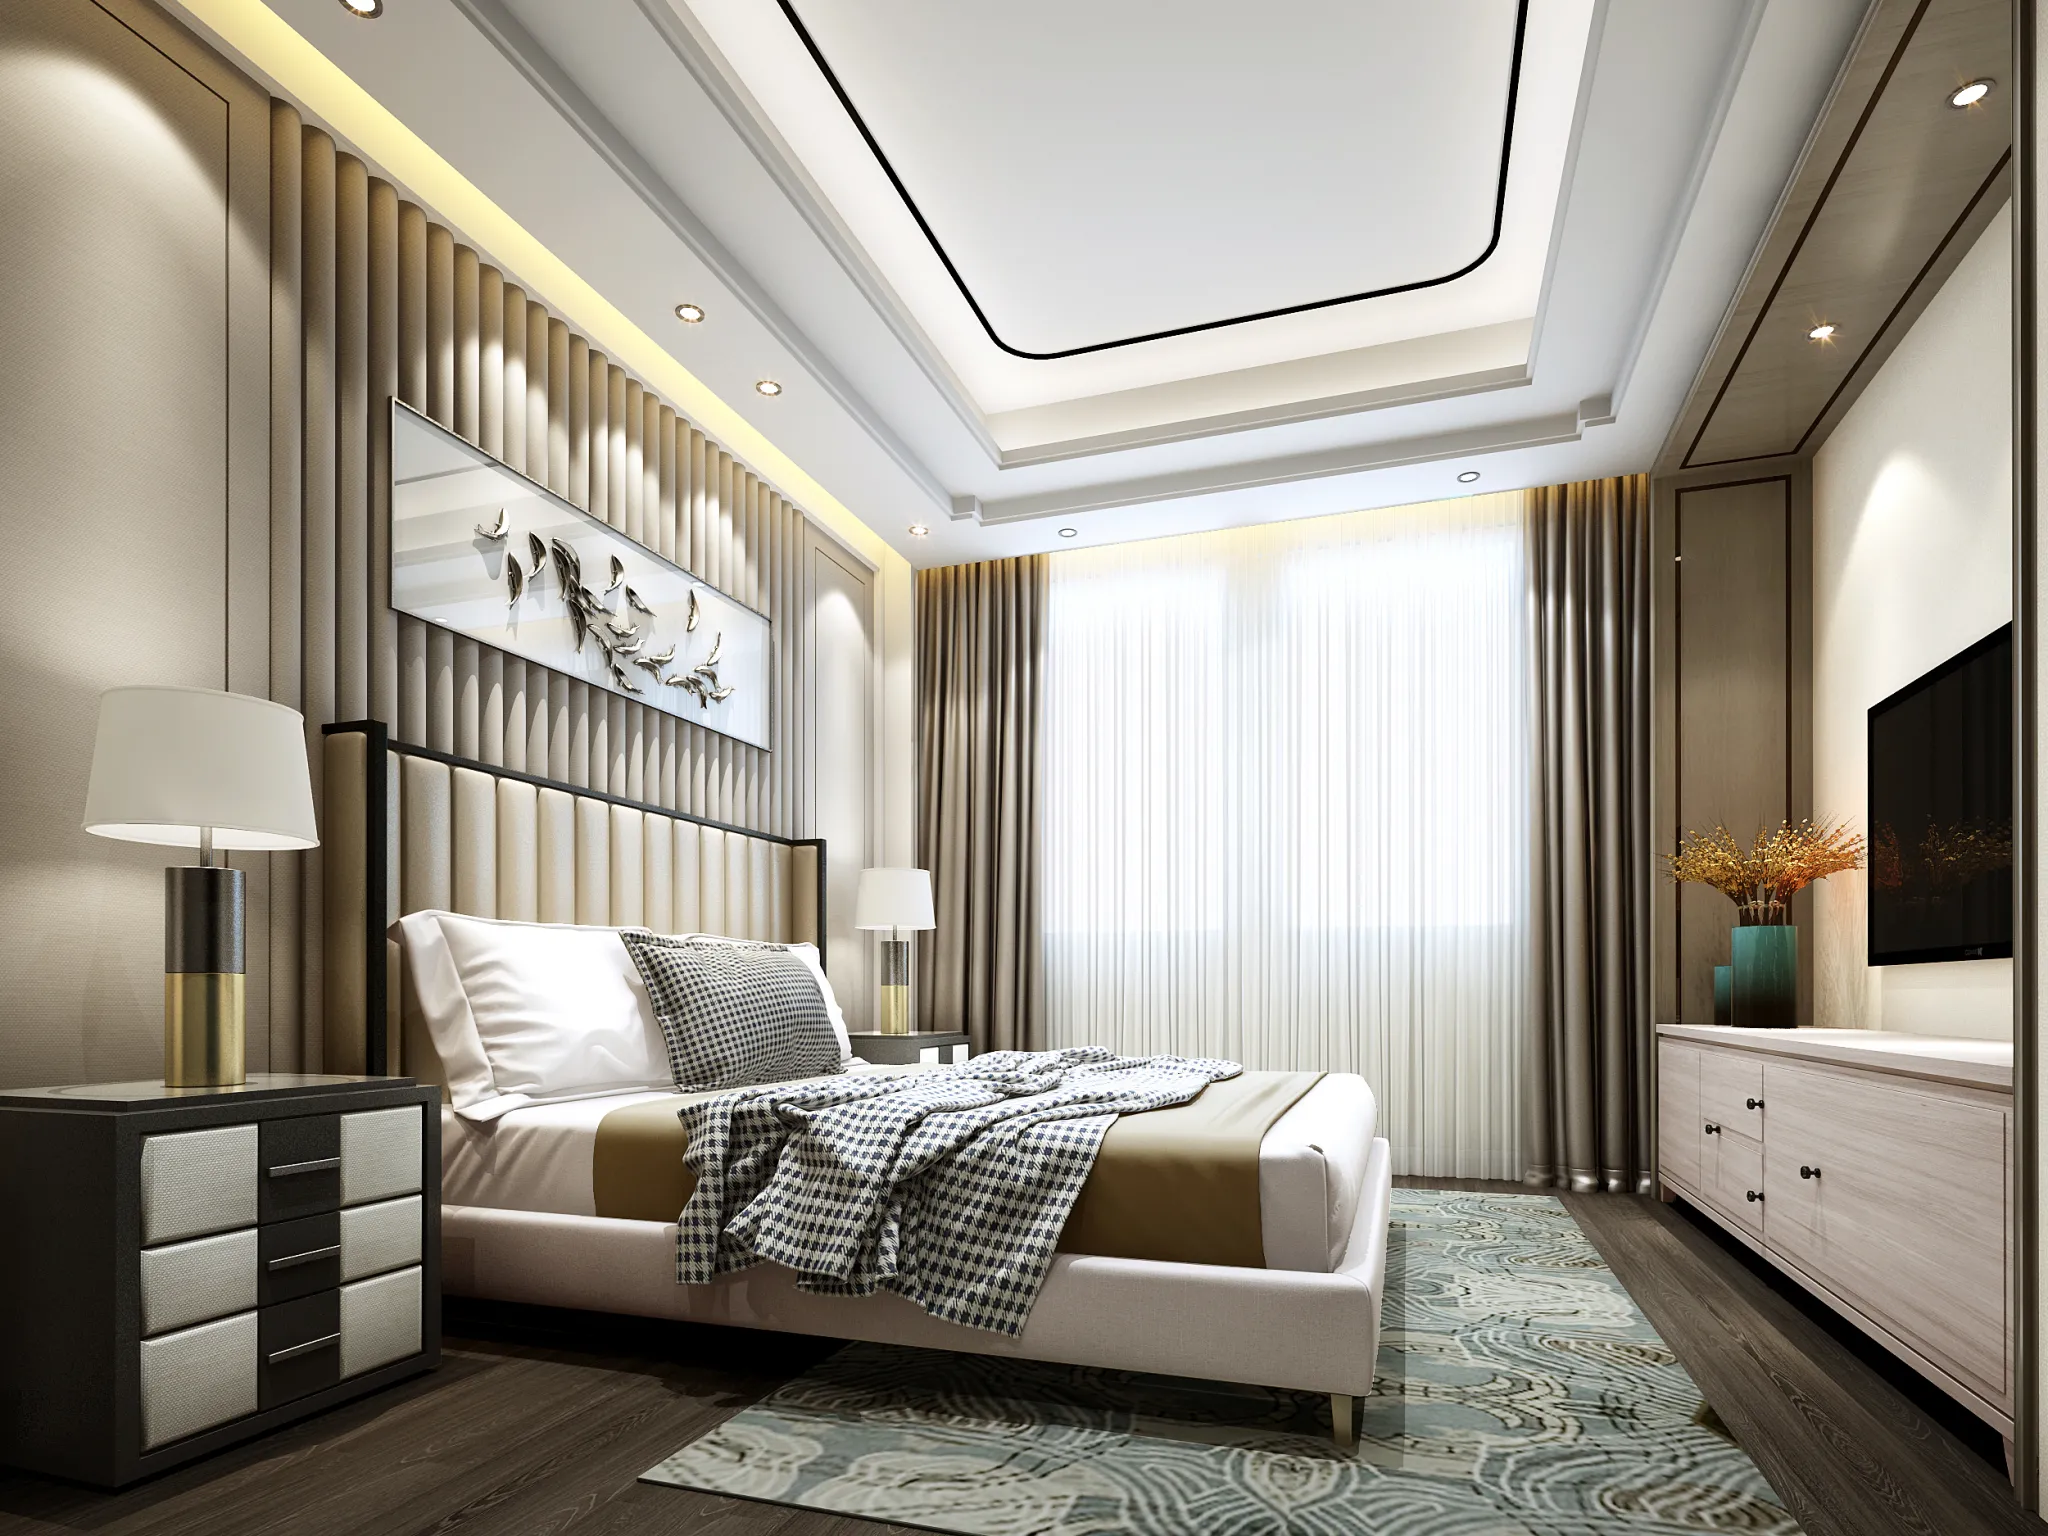 DESMOD INTERIOR 2021 (VRAY)/5. BEDROOM – 2. CHINESE STYLES – 13